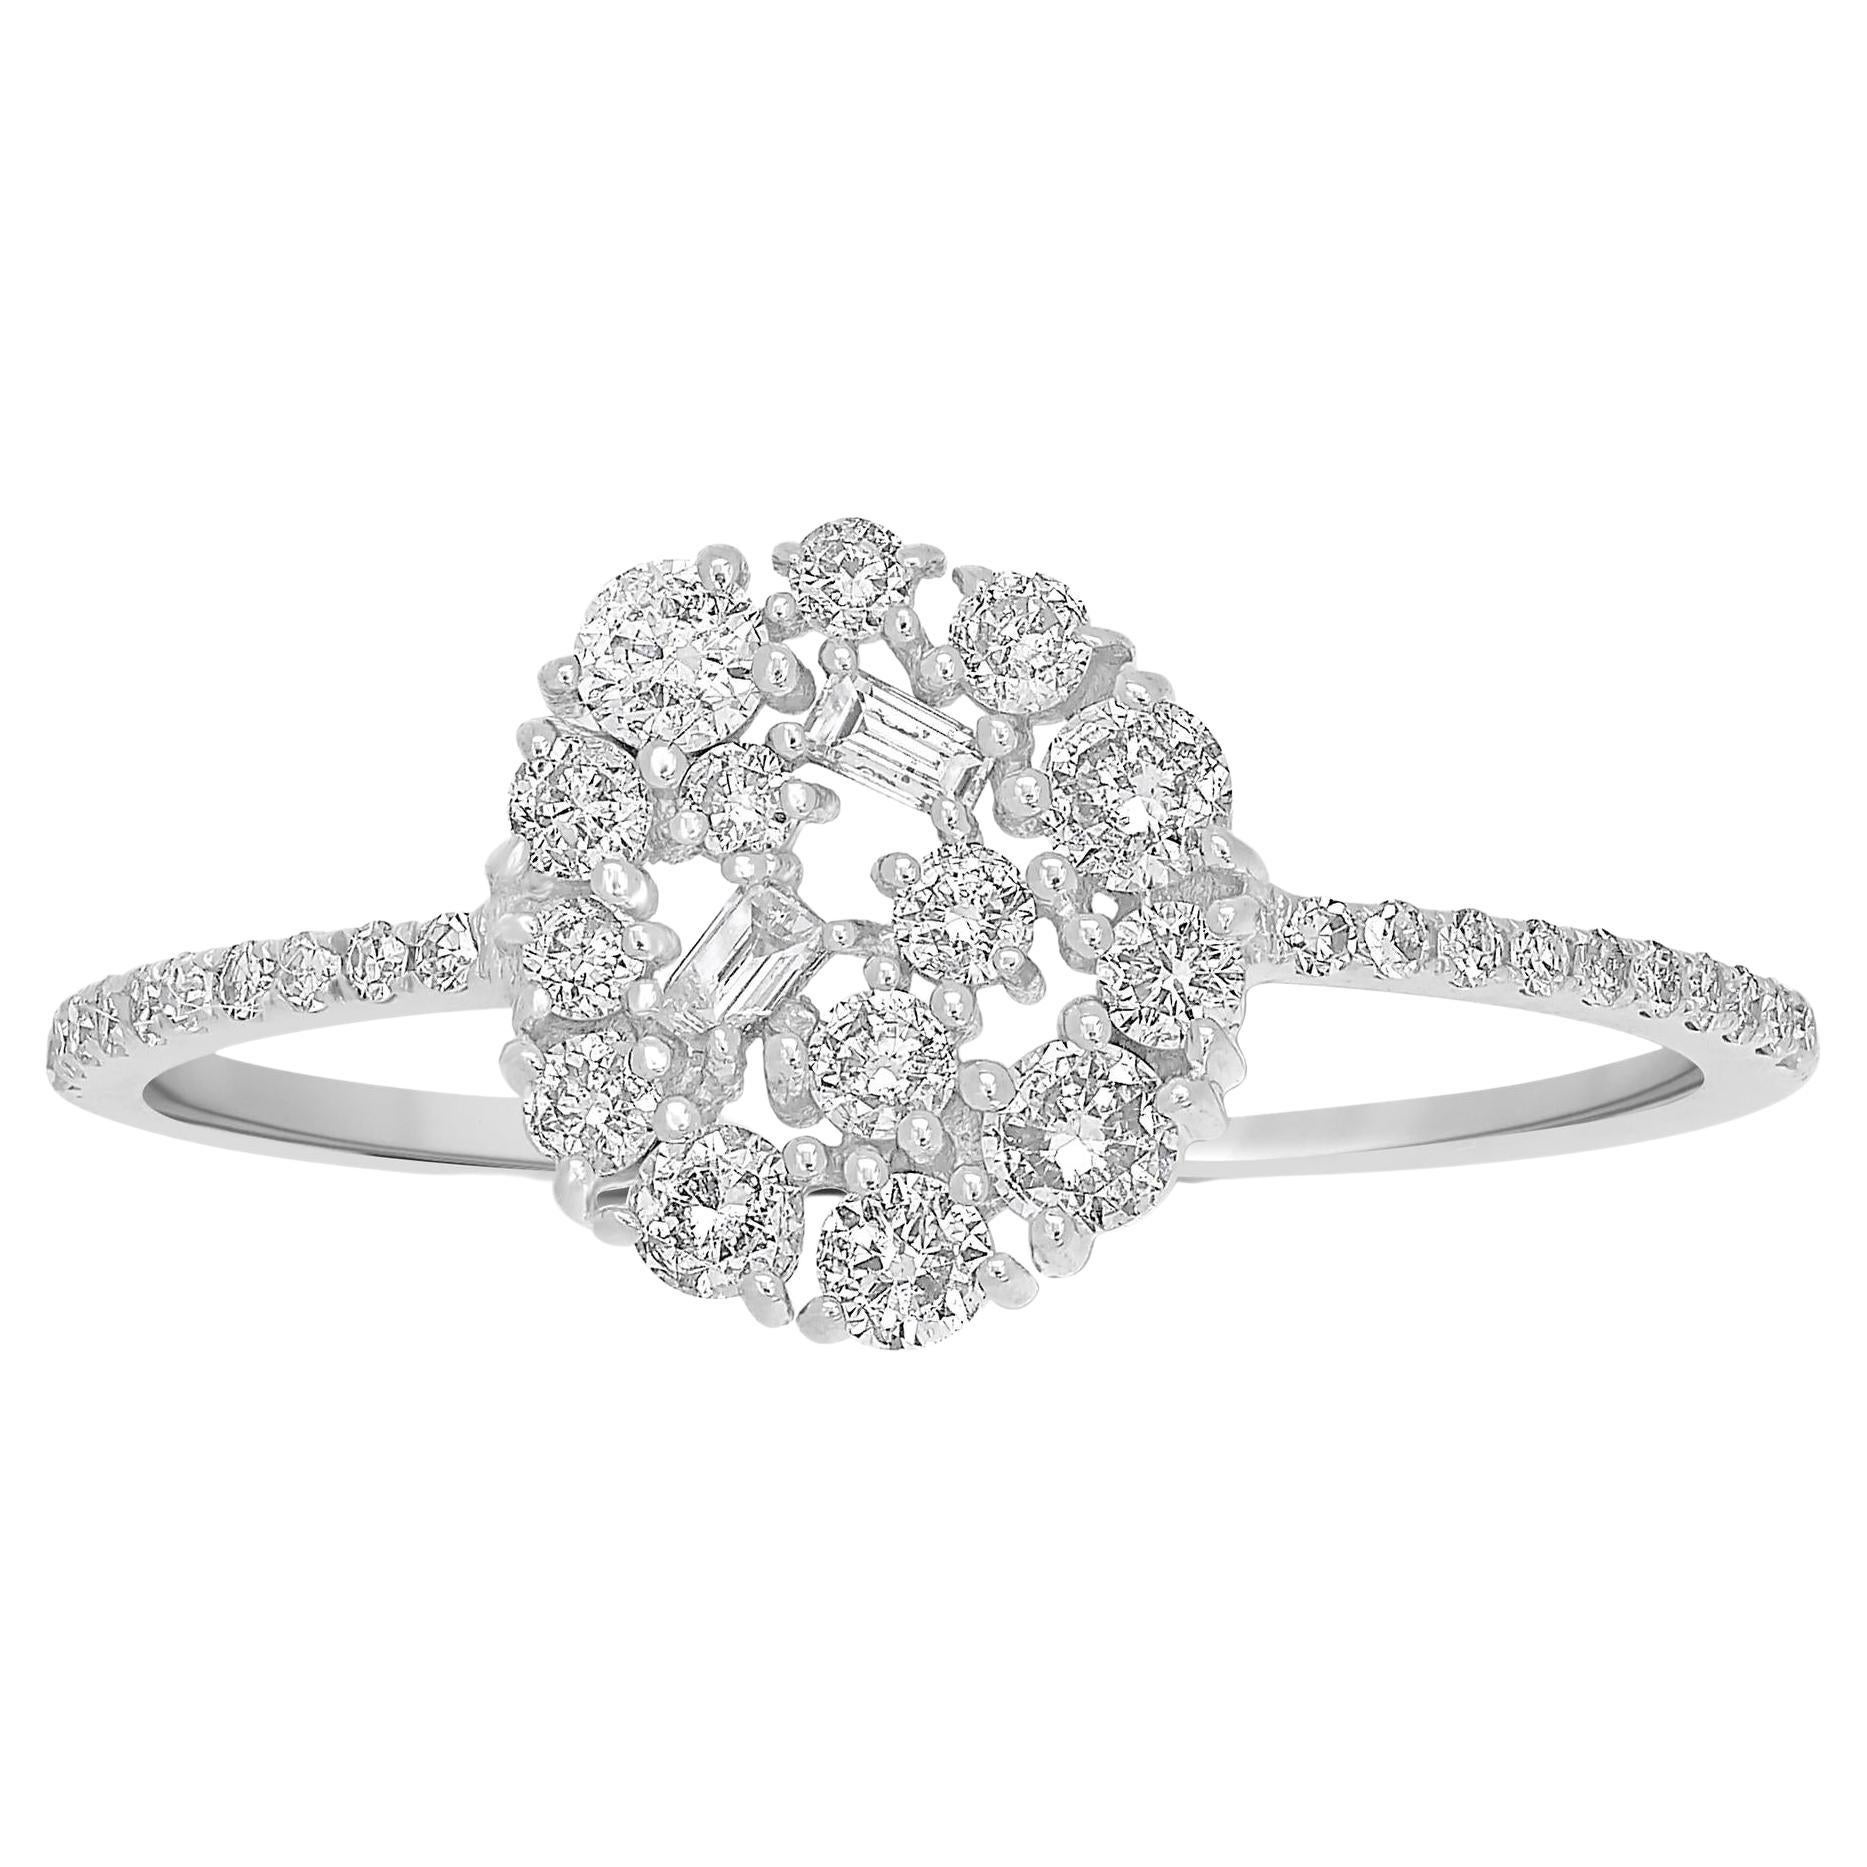 For Sale:  Luxle 3/8 Carat T.W. Diamond Cluster Ring in 14k White Gold